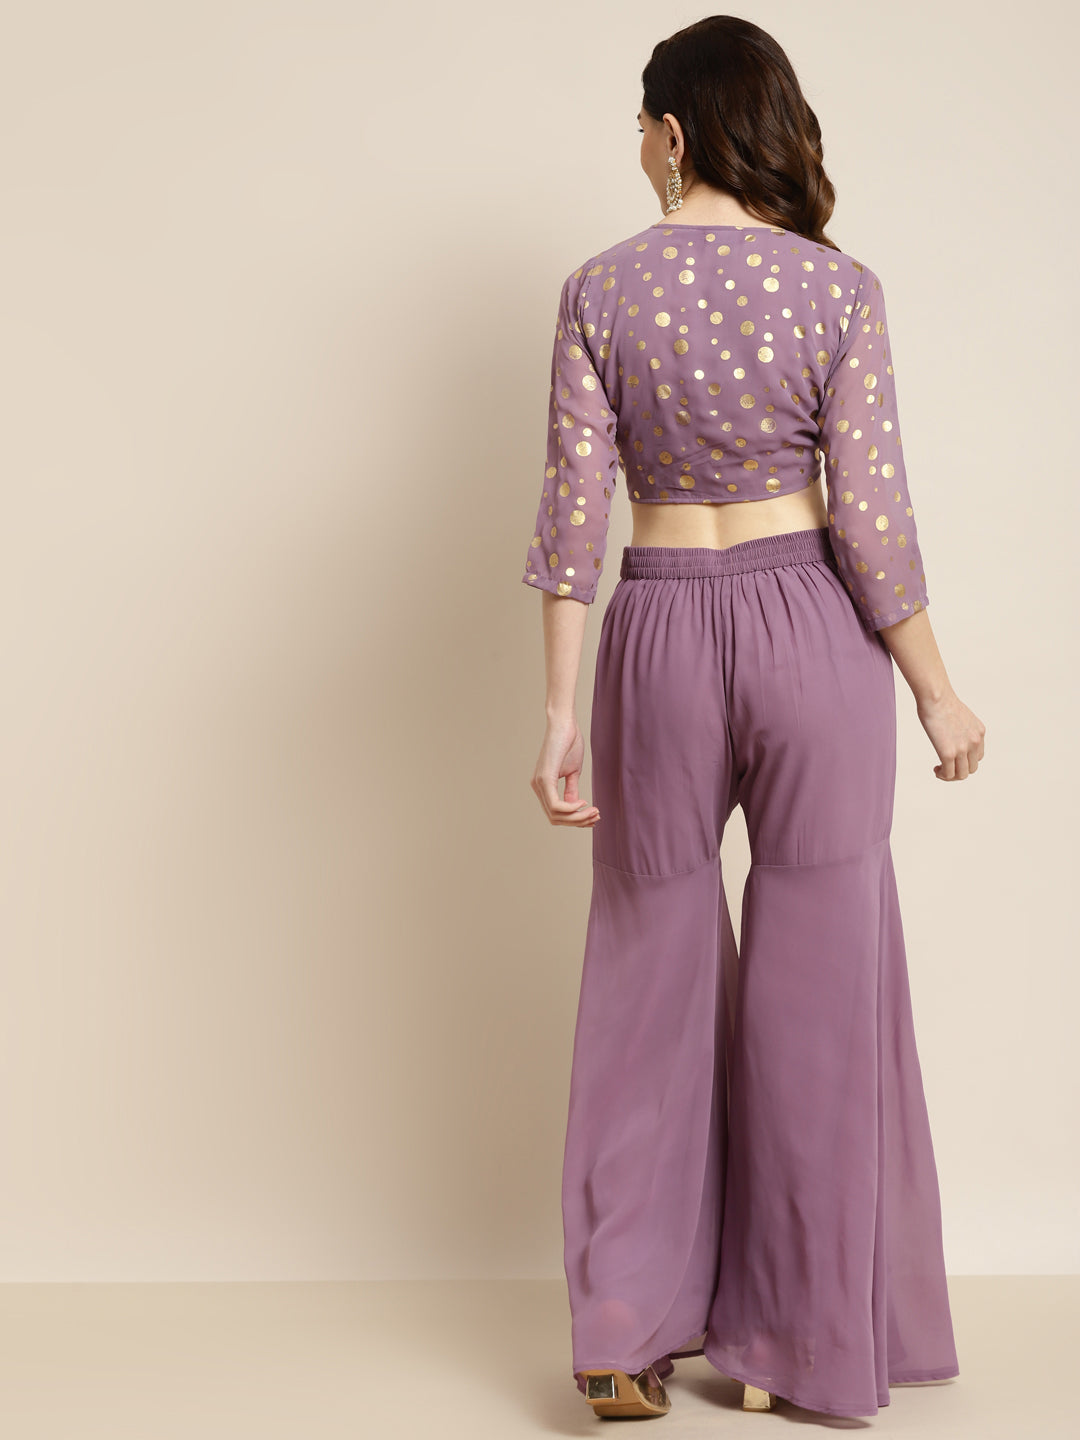 Lavender Halter Top With Pants  Dupatta  Party wear indian dresses Dress  indian style Indian fashion dresses